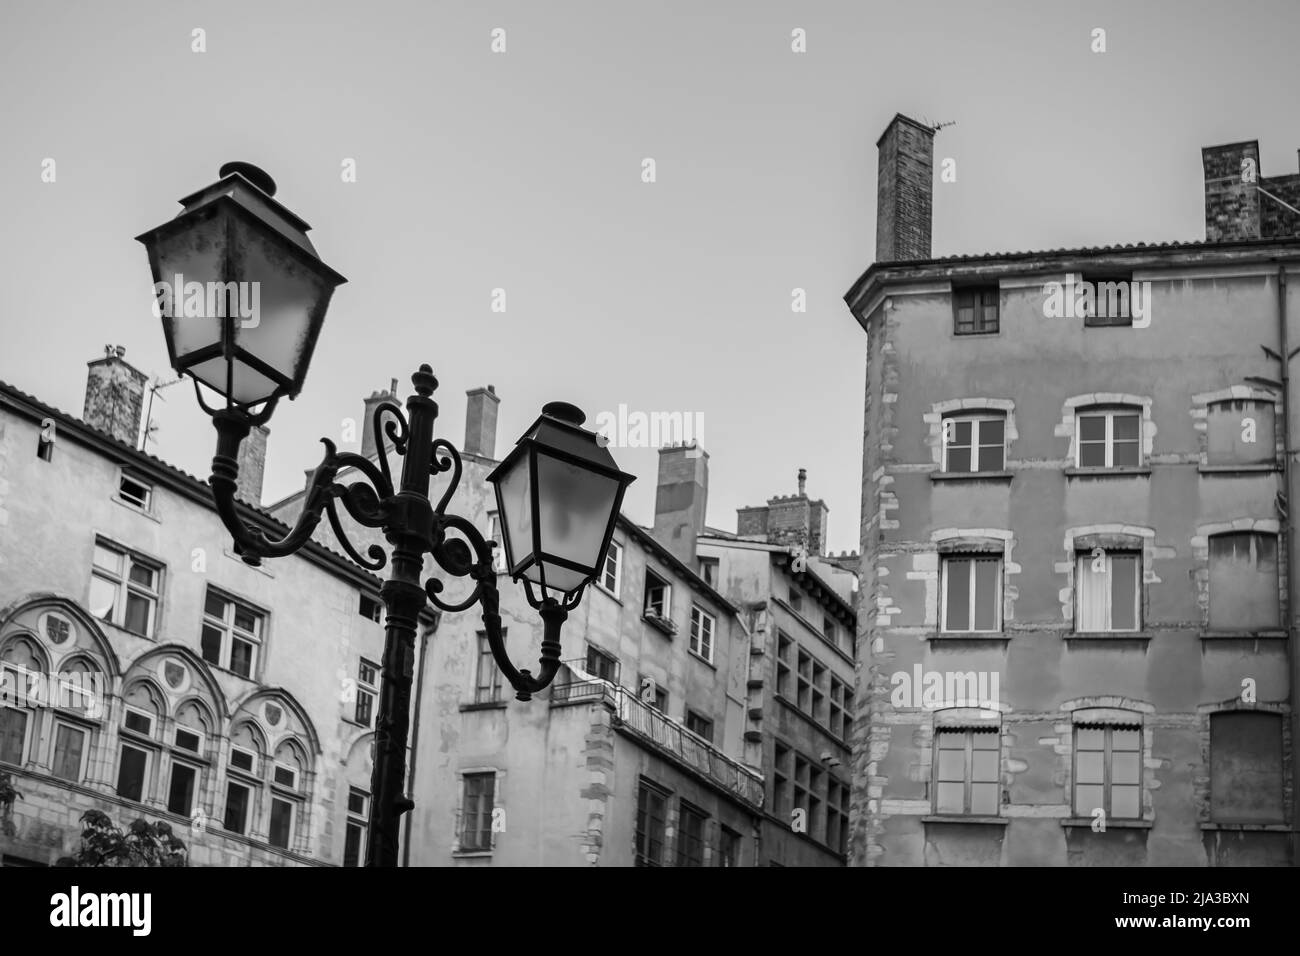 The picturesque old city of Lyon with its colorful residential buildings and vintage lamp post in black and white Stock Photo